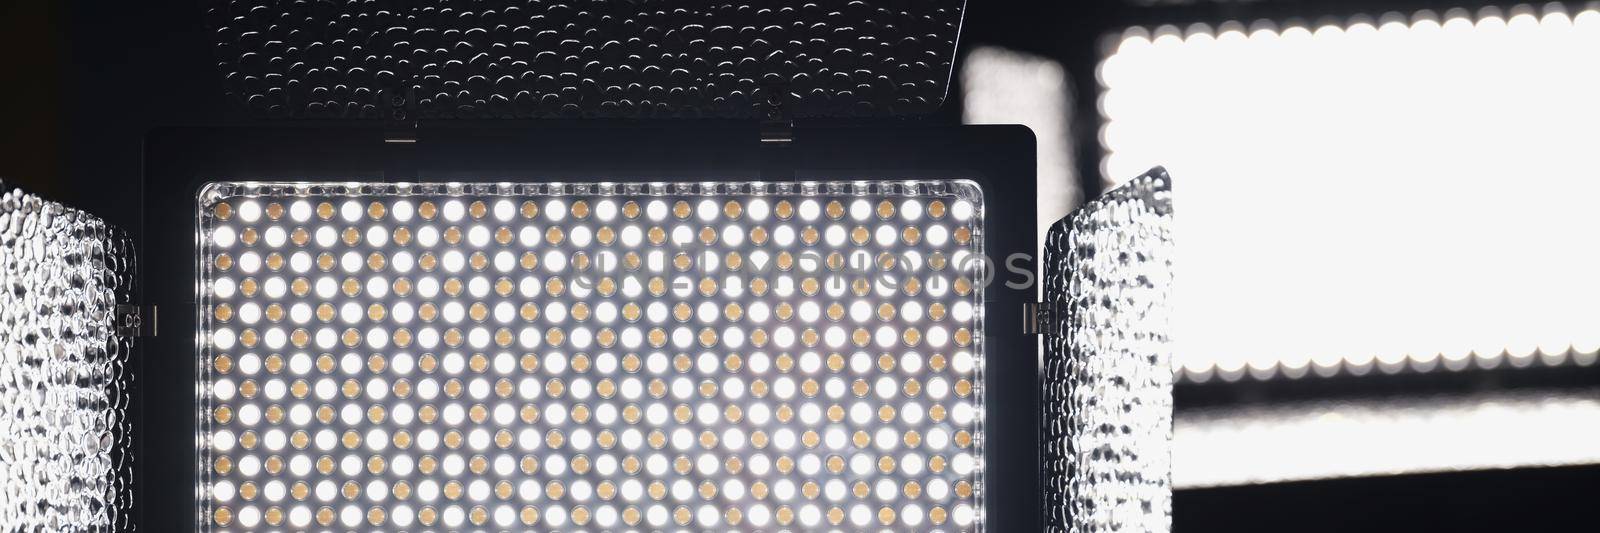 LED lighting, lamp fixture light source, LED panel close-up by kuprevich